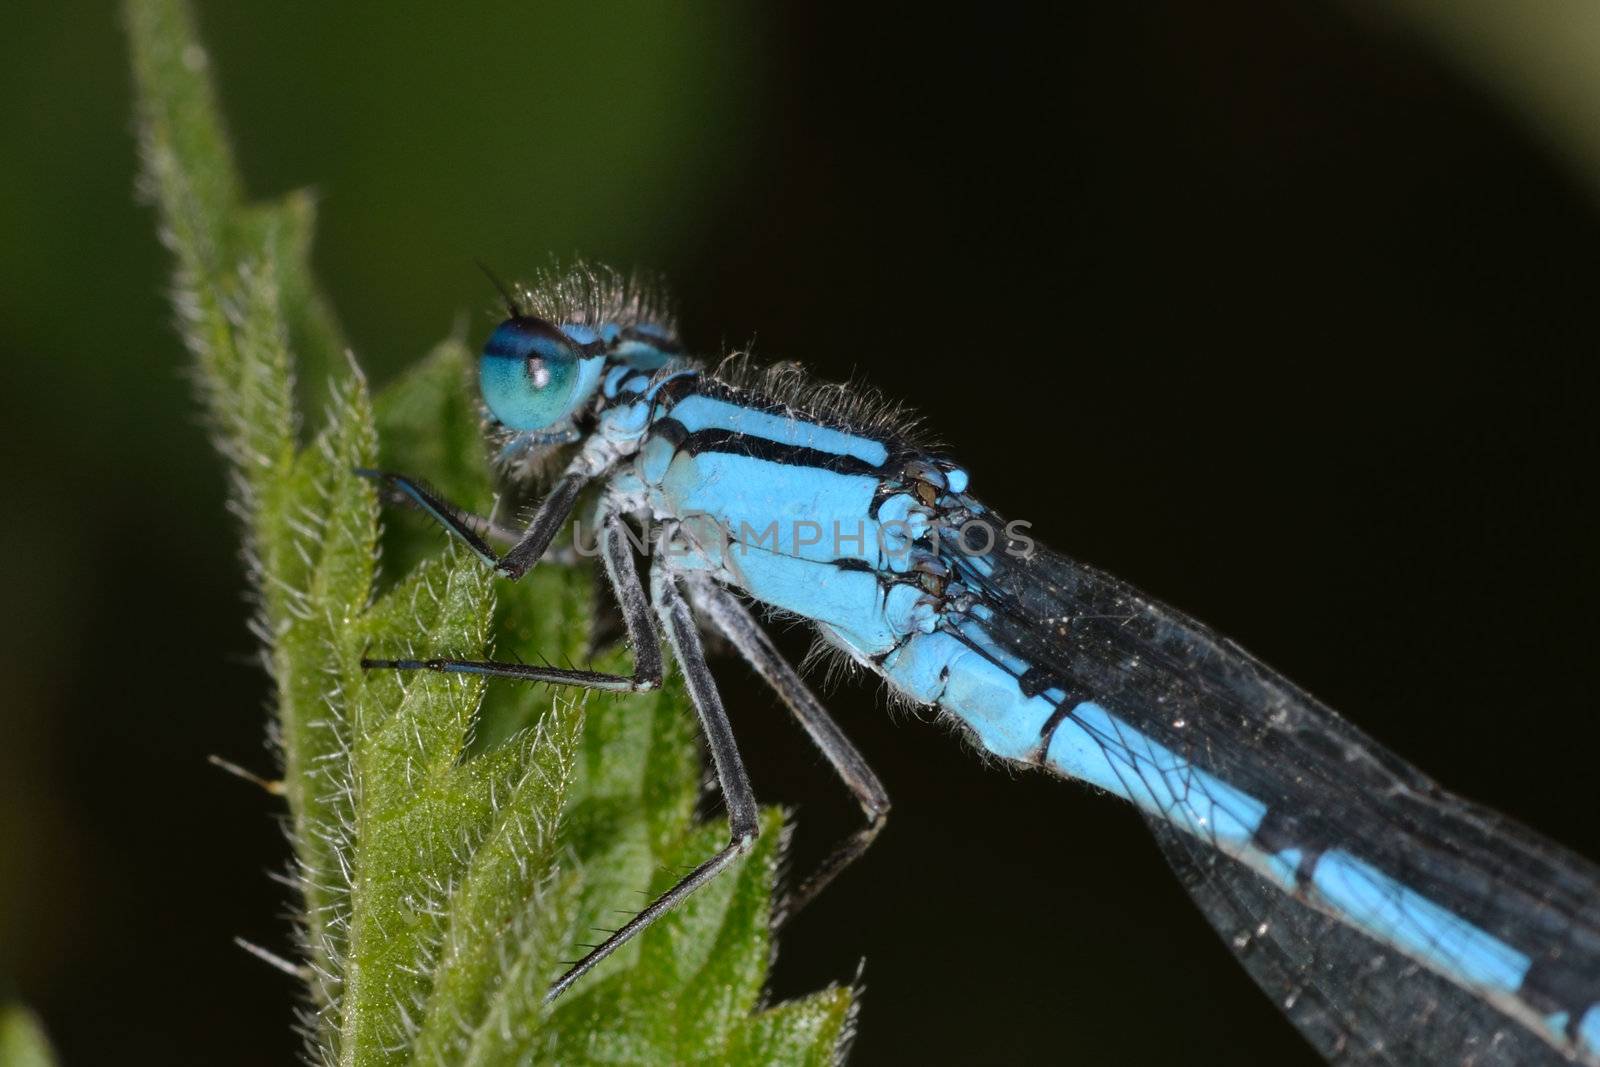 Close up of blue dragonfly  by pauws99